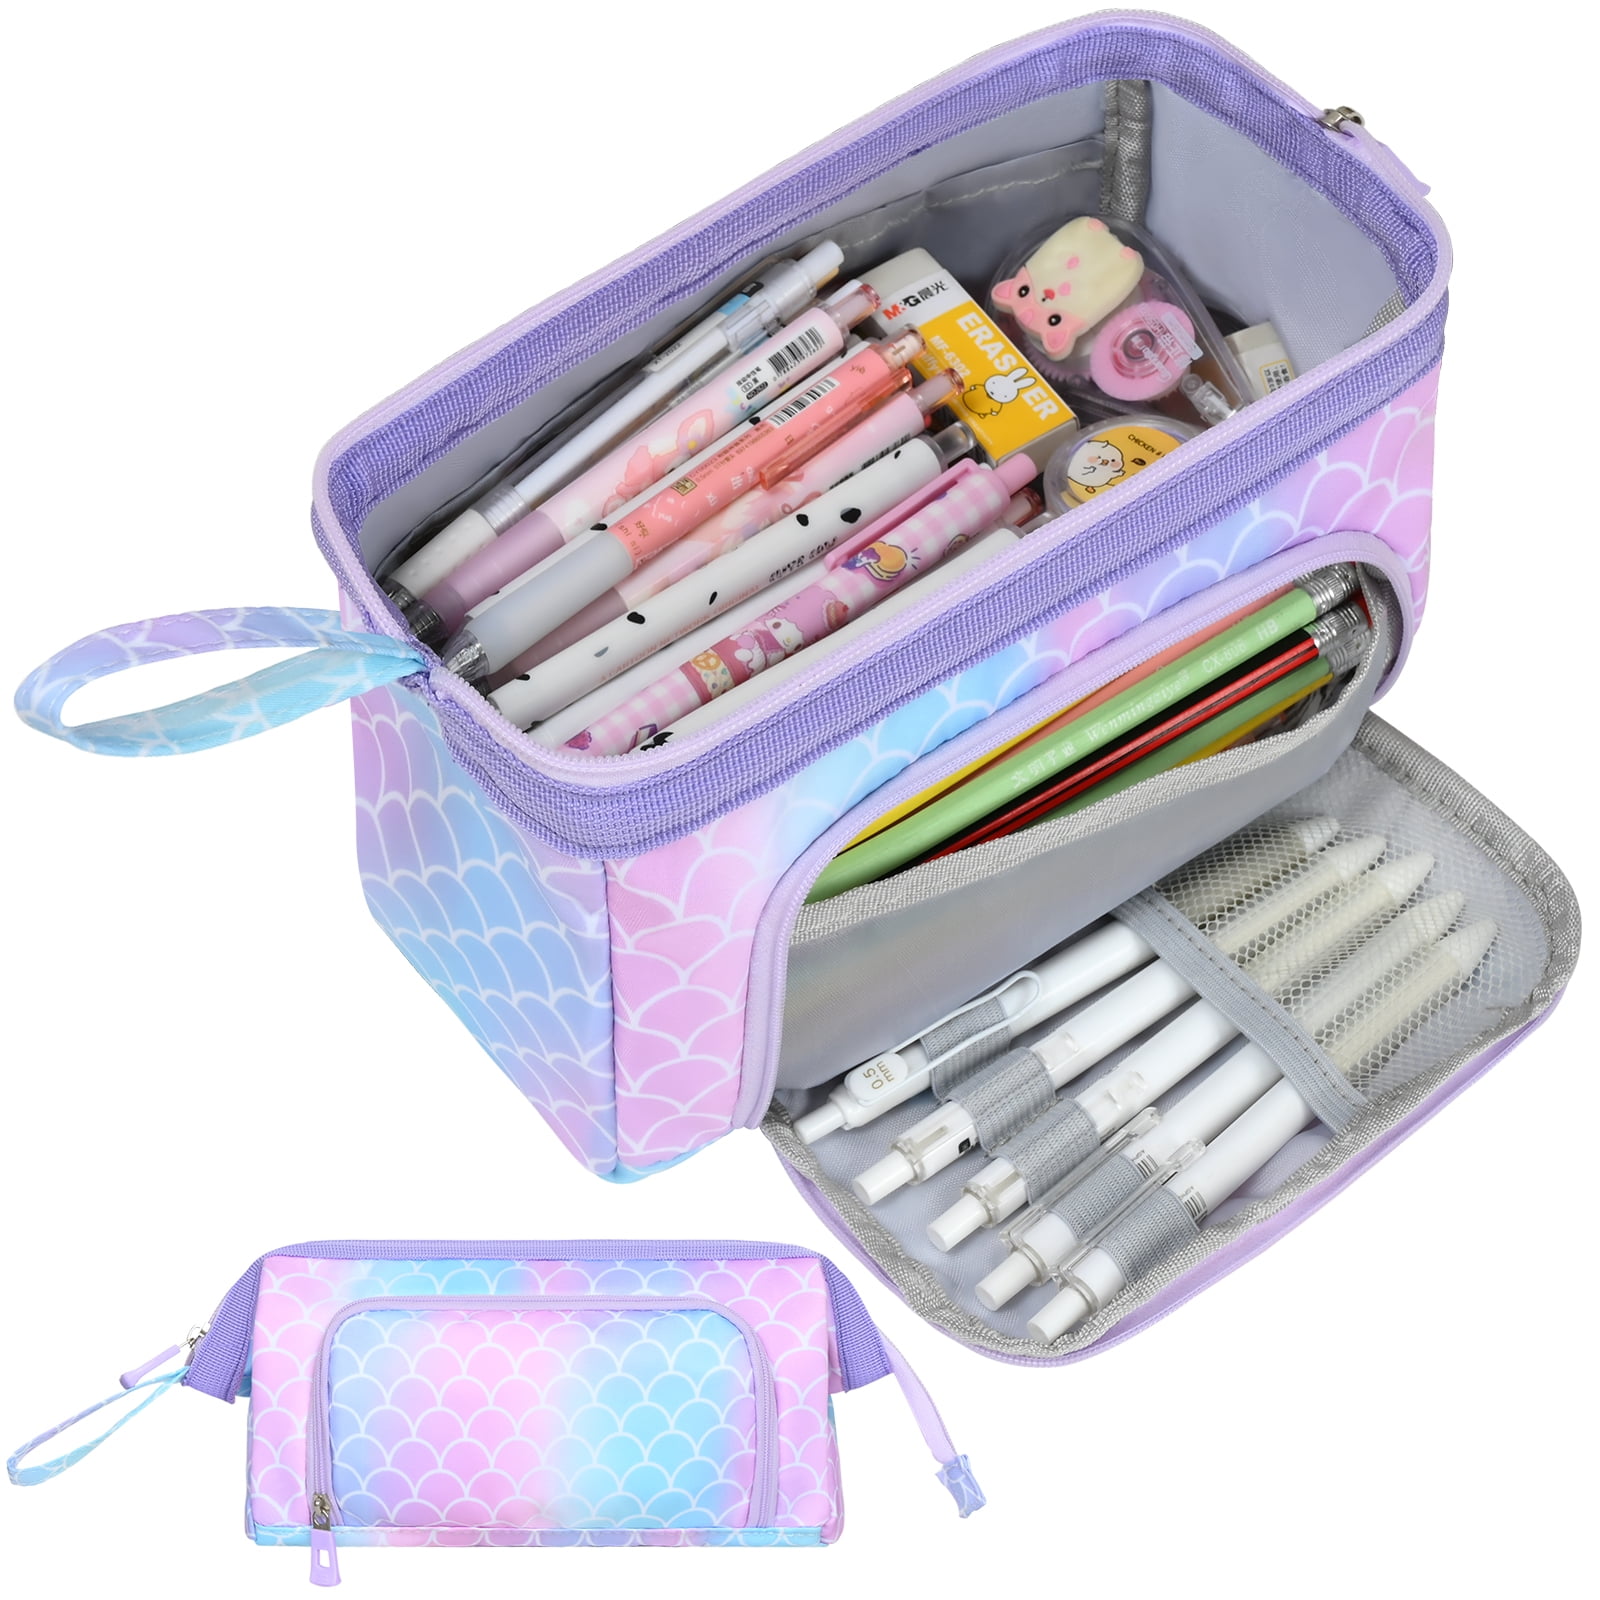 Cambond Pencil Case for Girls - Large Capacity Multi-slot Kids